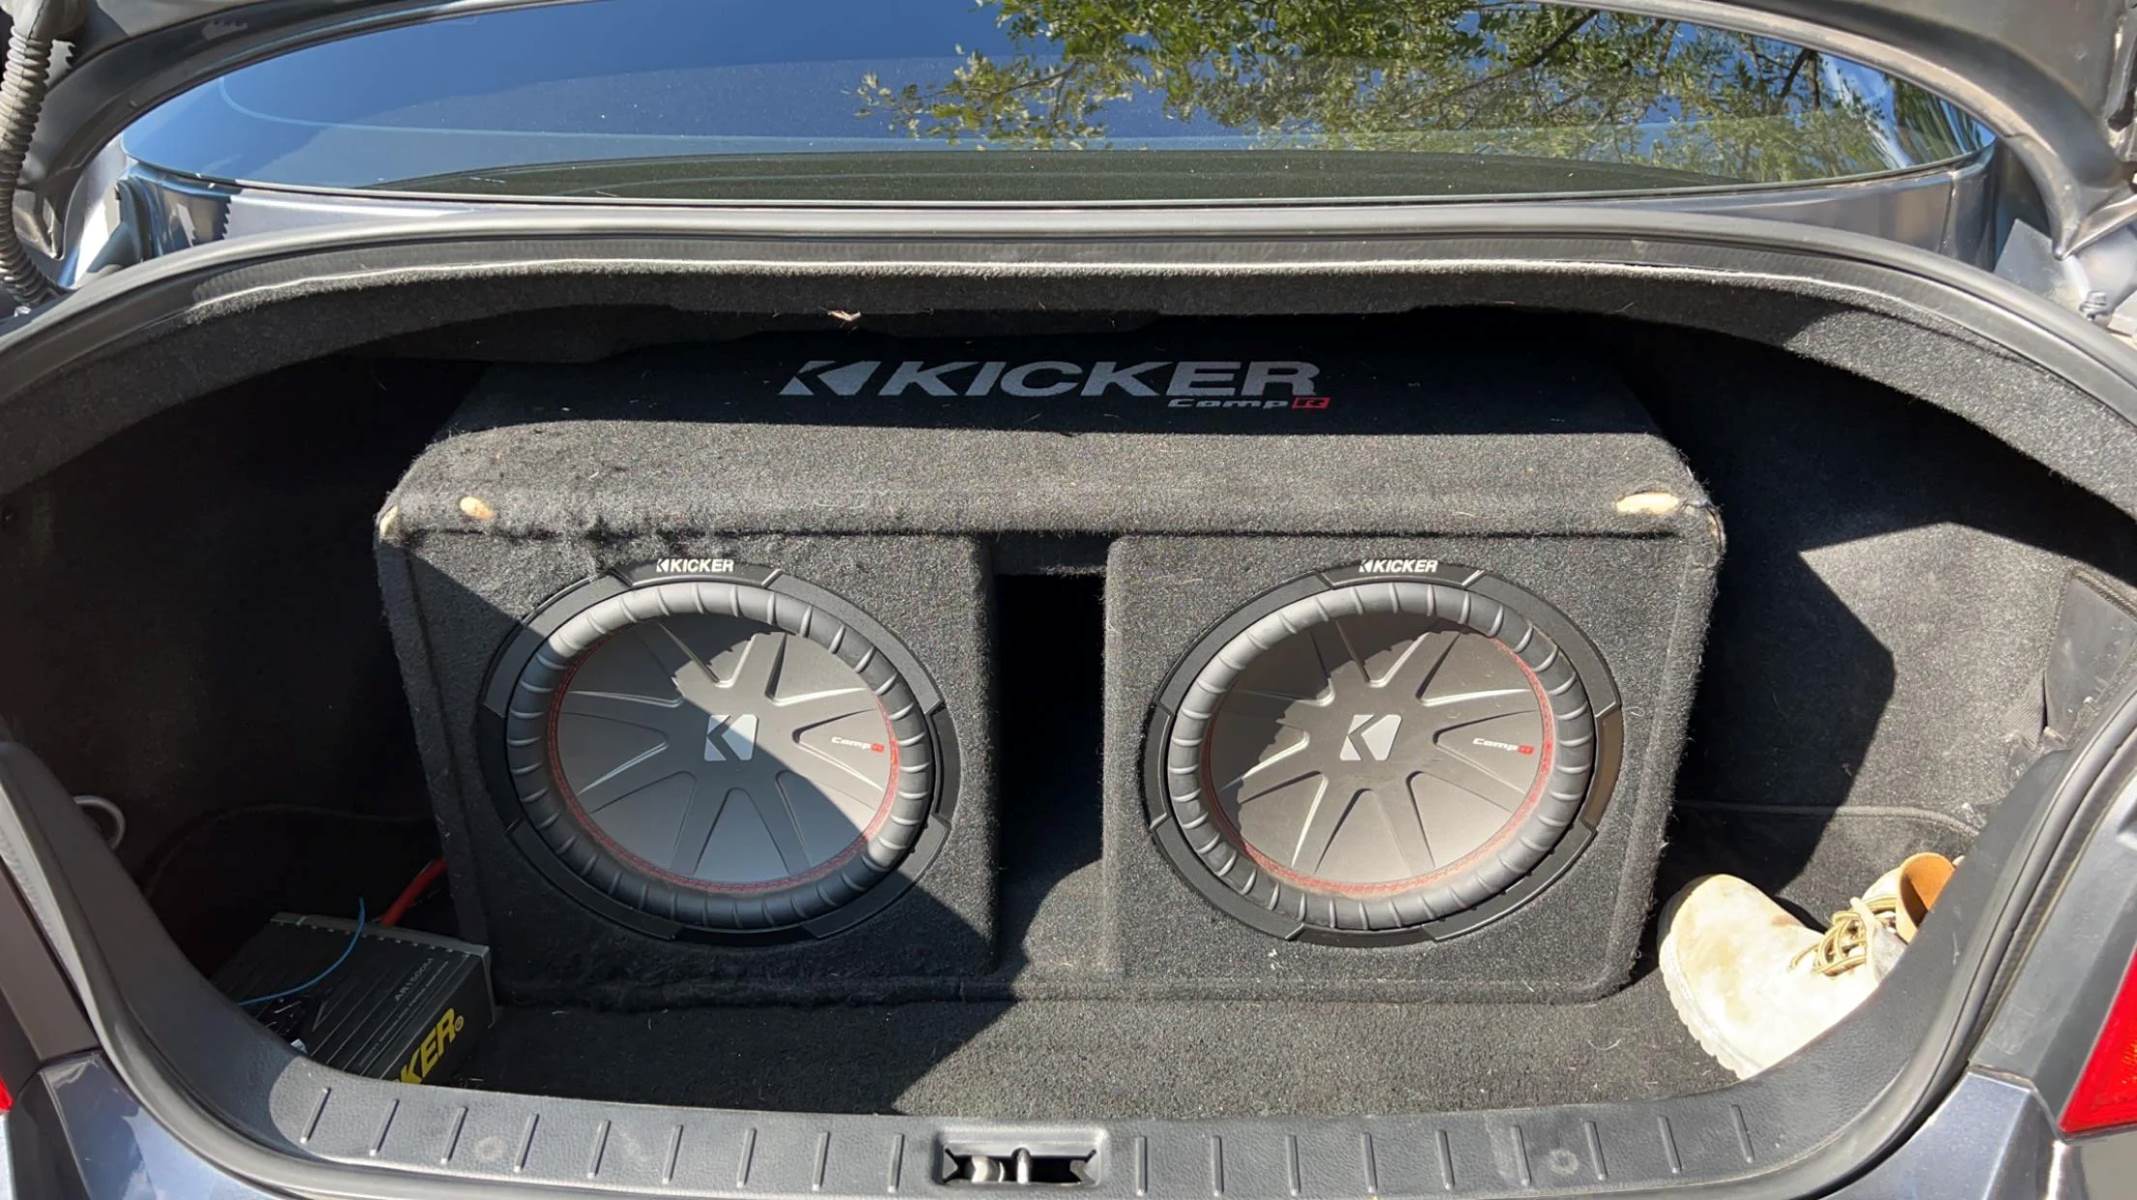 Which Way Should Subwoofer Face In Trunk